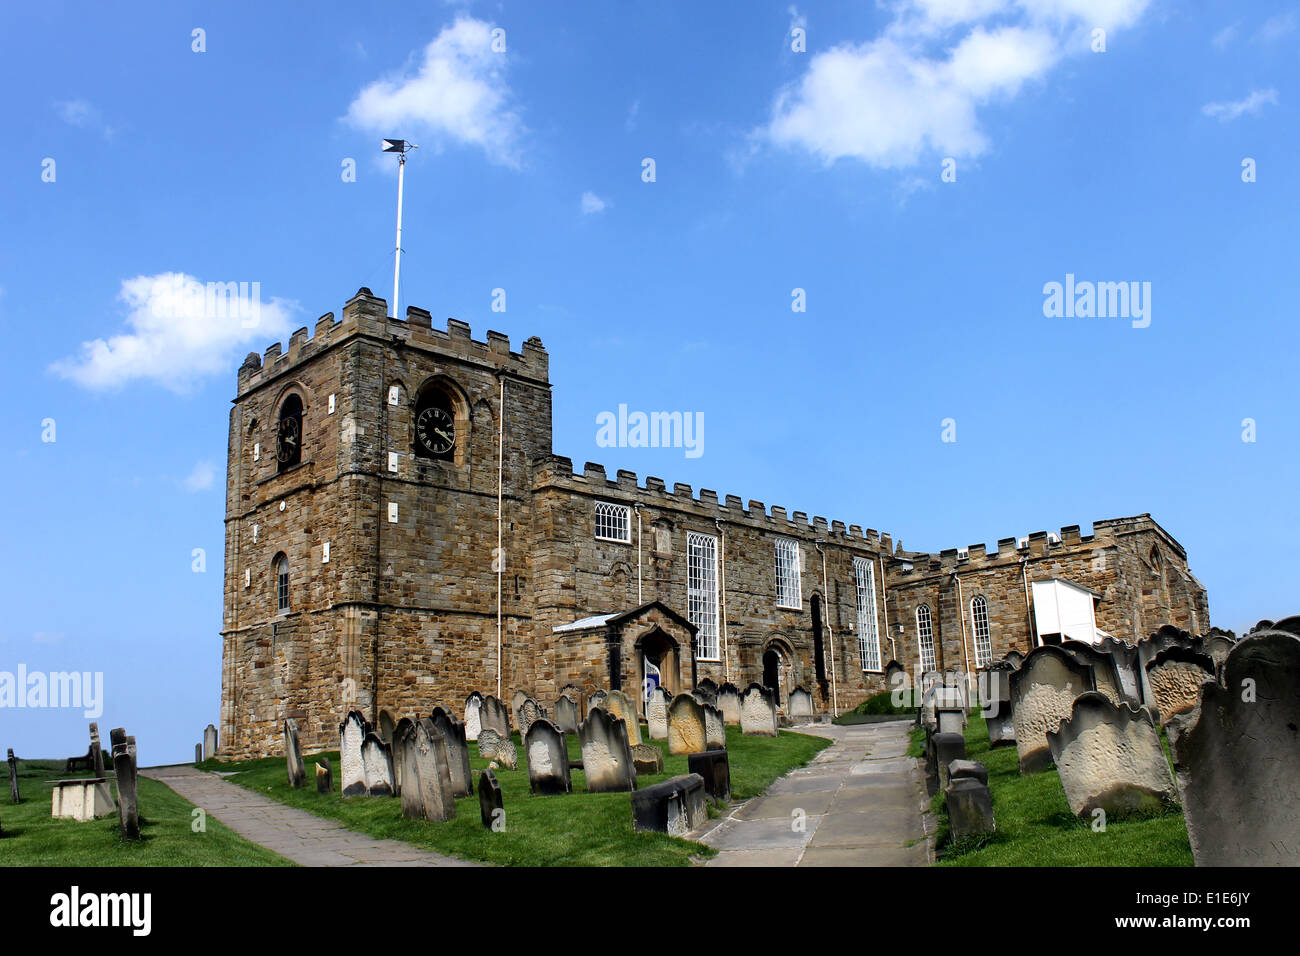 Saint Marys church in Whitby. North Yorkshire, England. Stock Photo